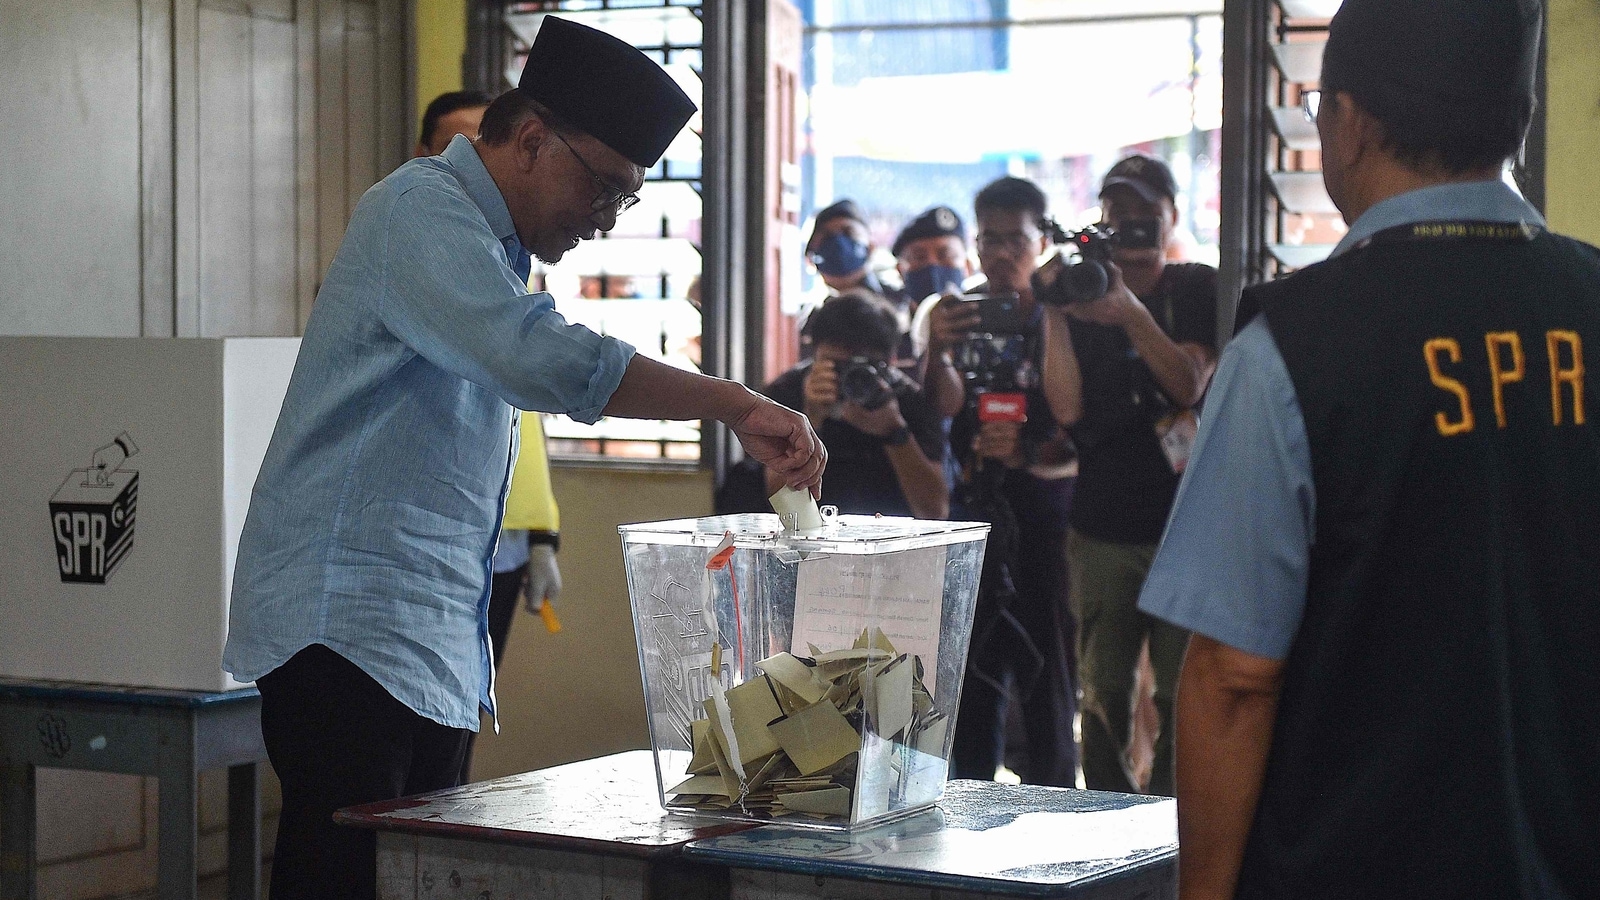 Malaysia’s general elections: A mandate of hope
– News X